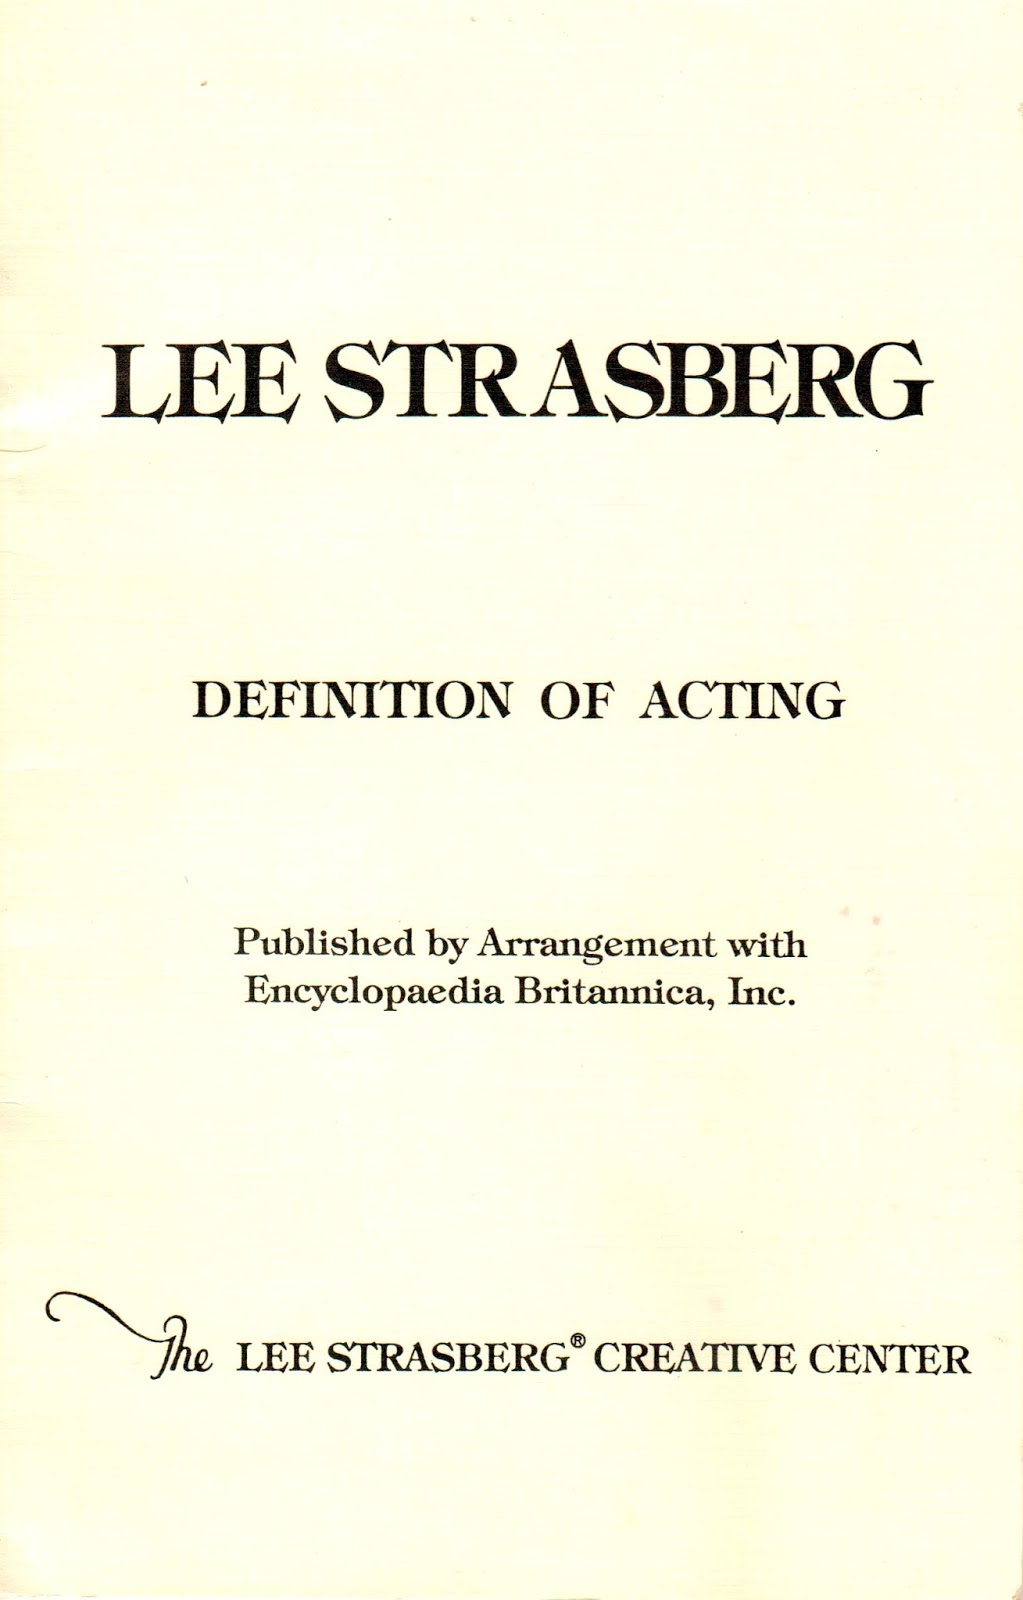 The Definition of Acting by Lee Strasberg (for Encyclopedia Britannica) |  The Actors Work